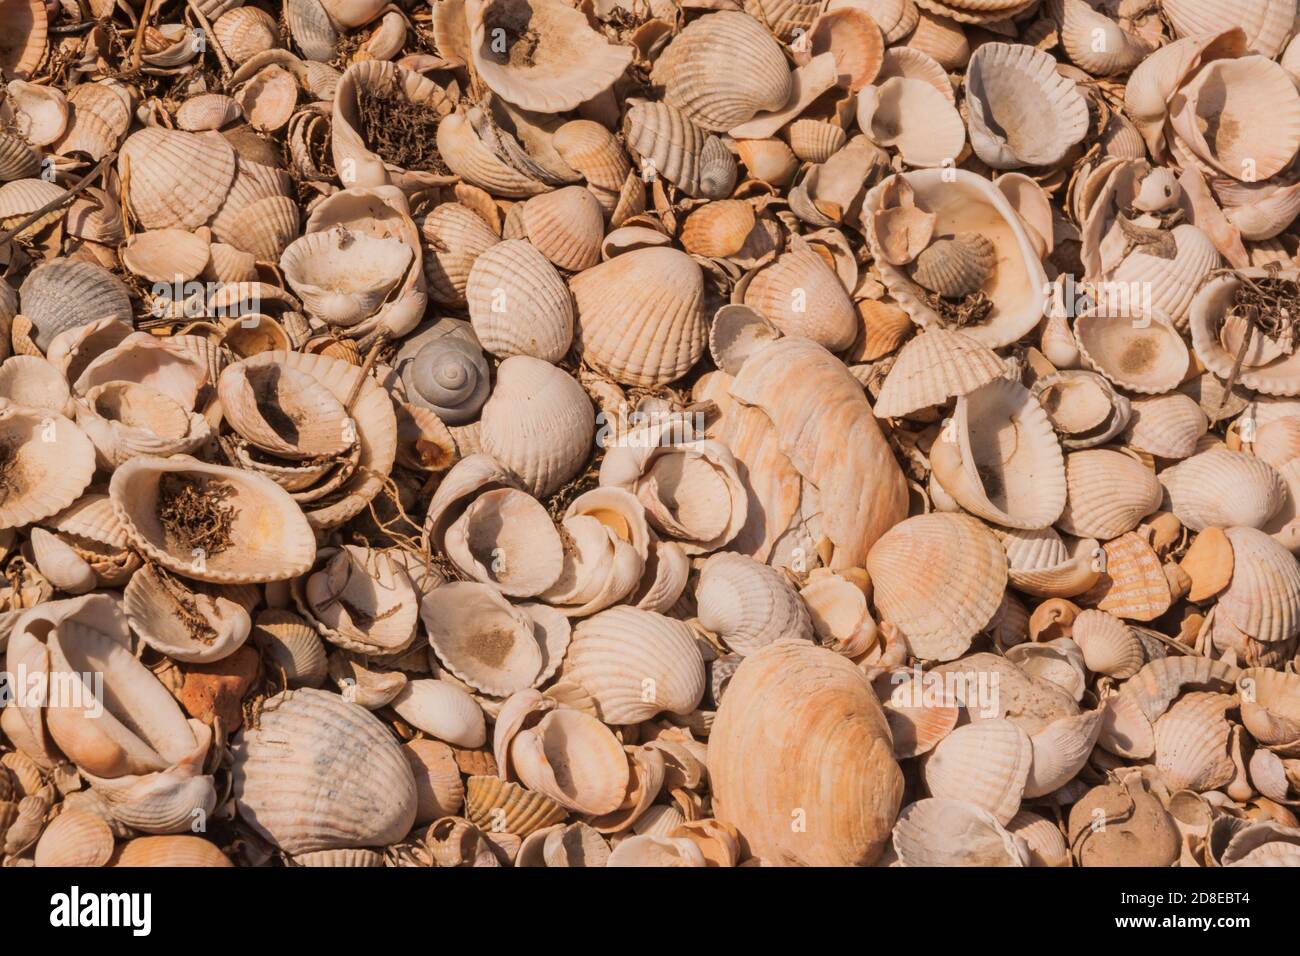 Small sea shells. a scattering of light shells. eco background. Protection of the seas and oceans, protection of nature and ecology. study of clams marine mollusks. Eco-friendly natural sources of calcium. Stock Photo